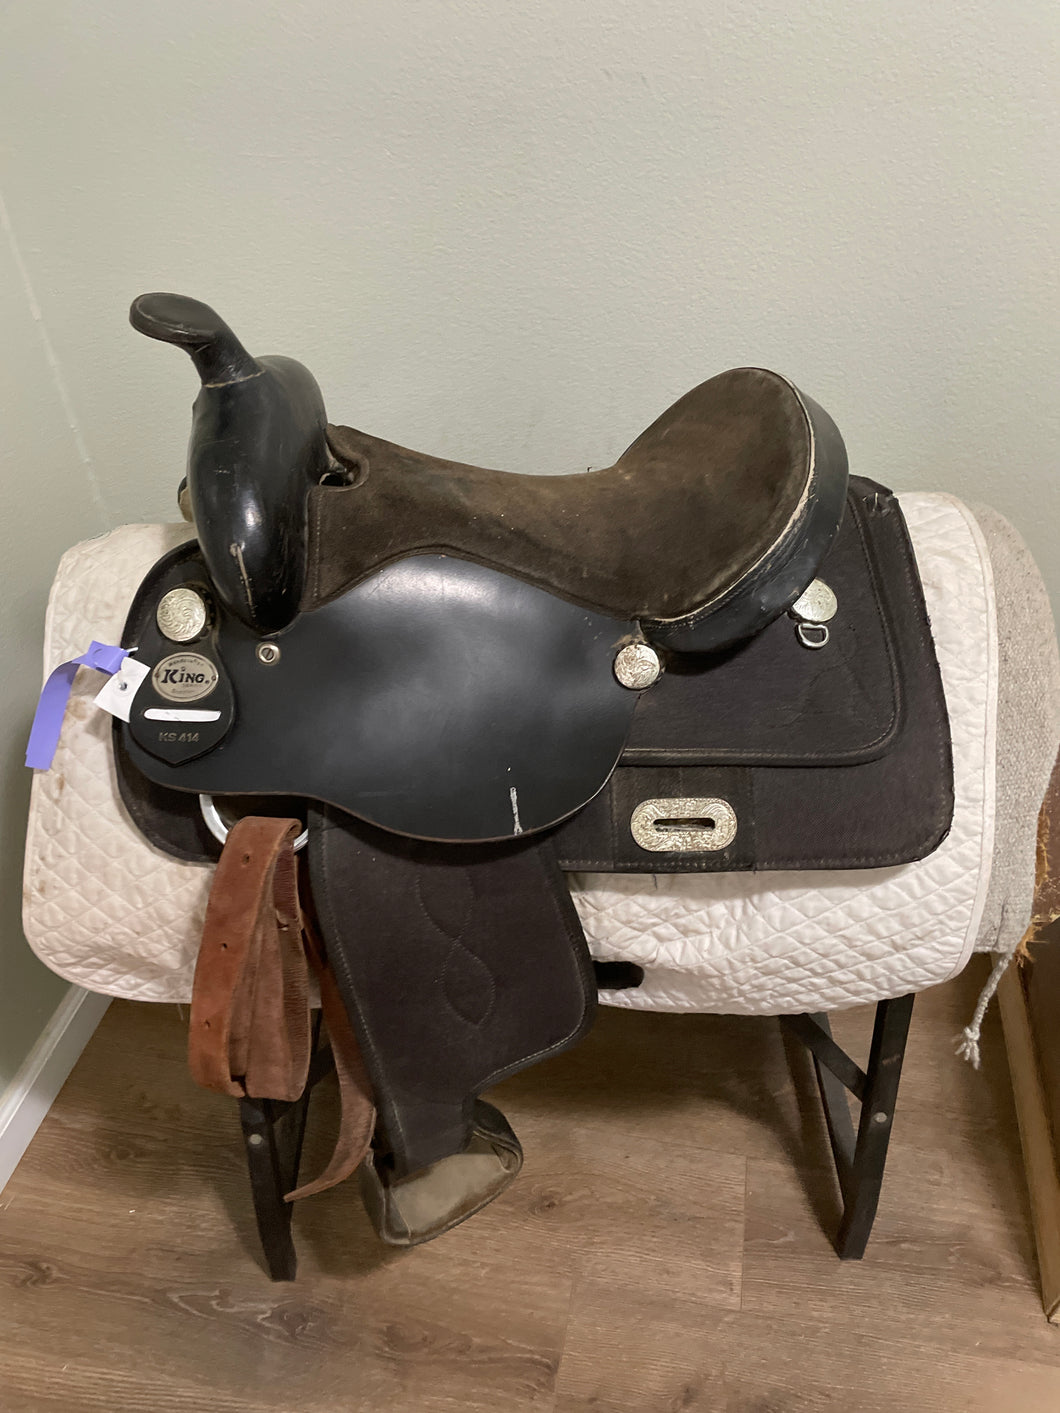 14” King Series Synthetic Western Saddle